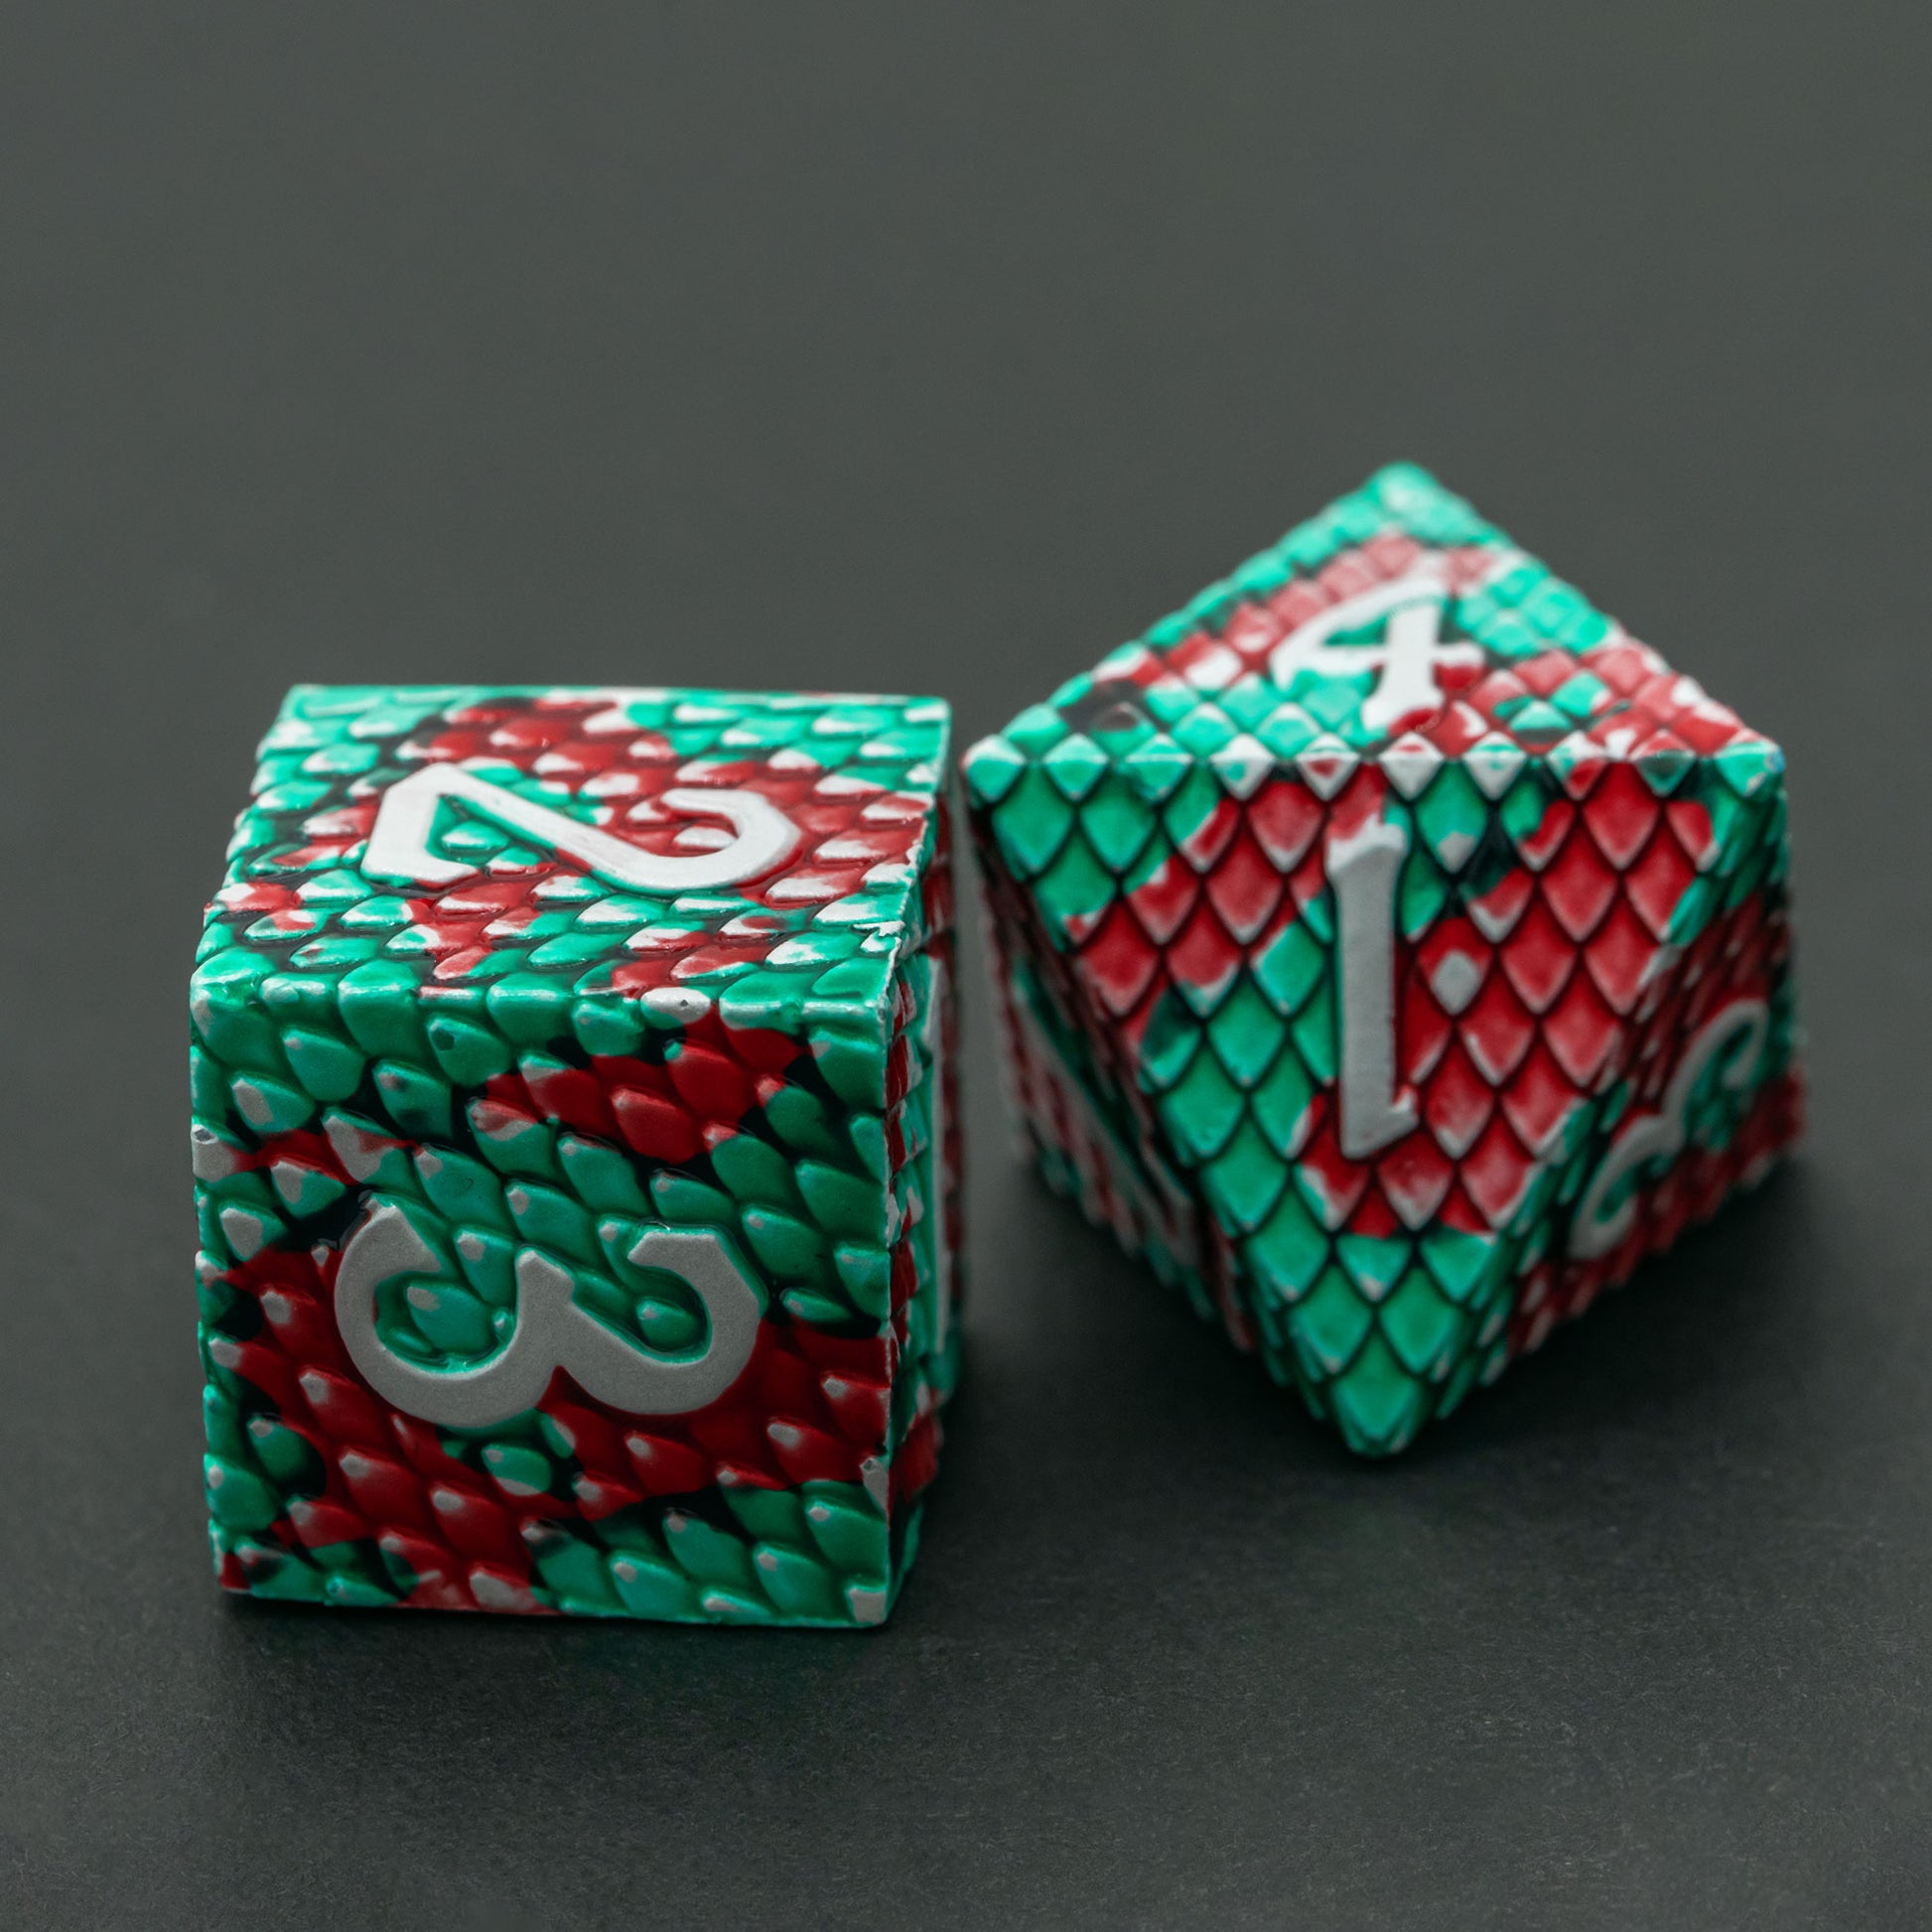 D6 and D8 dragon scale dice highlight